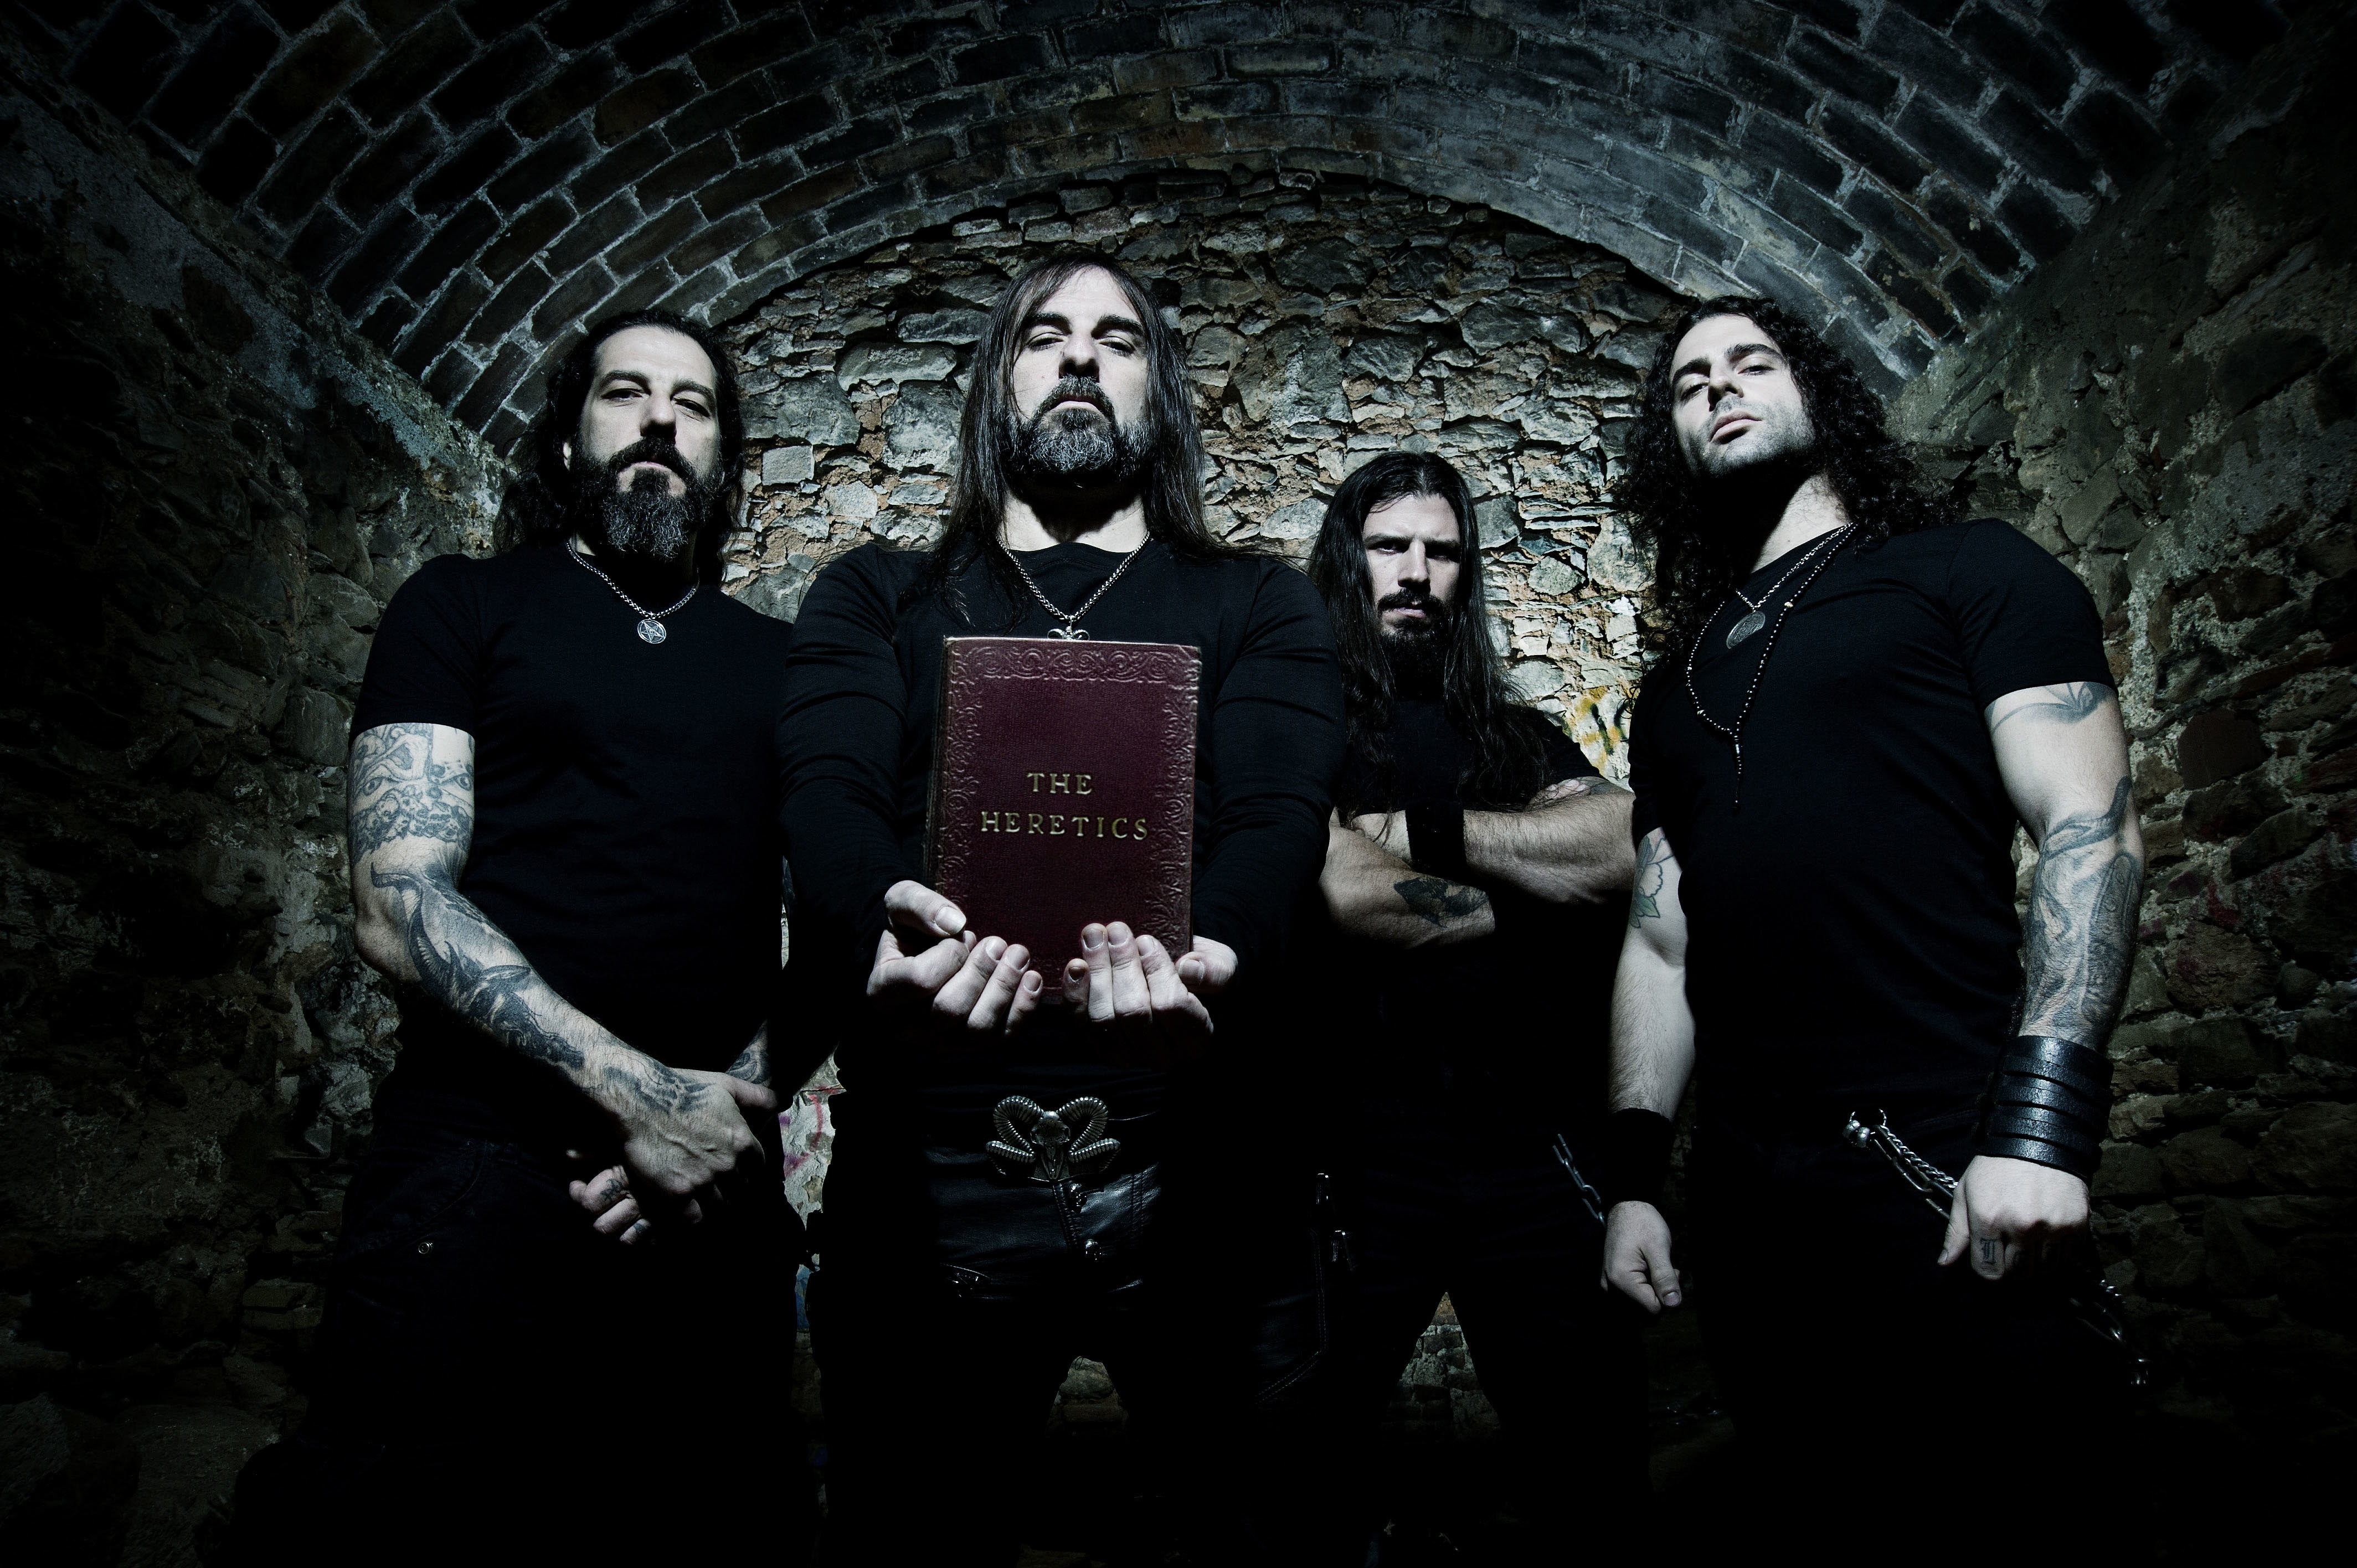 Rotting Christ raise “Heaven and Hell and Fire” in new lyric video